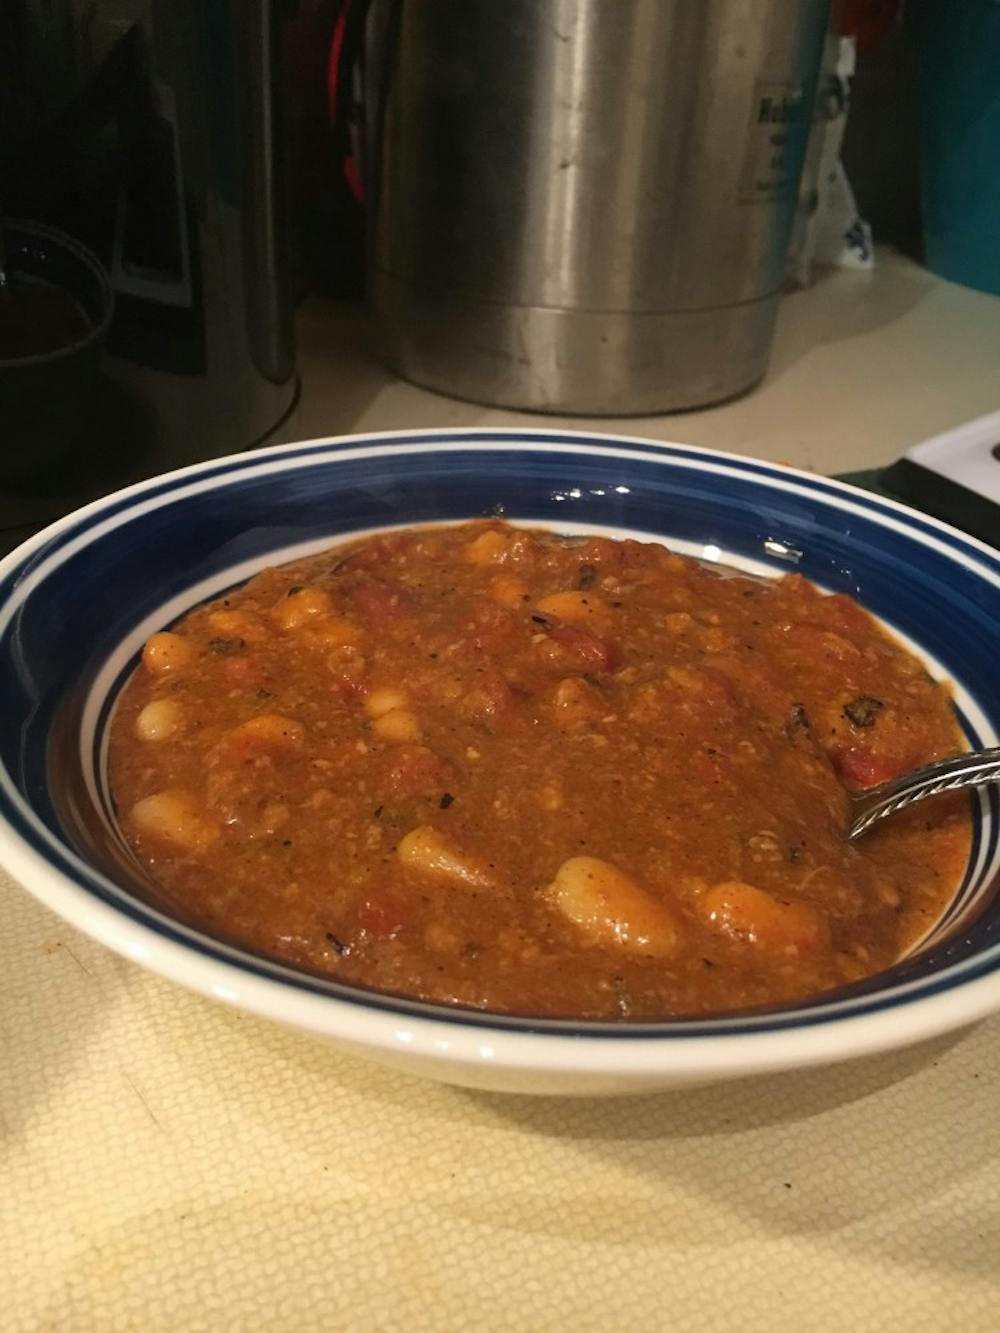 Recipe of the week: Slow cooker Turkey Chili